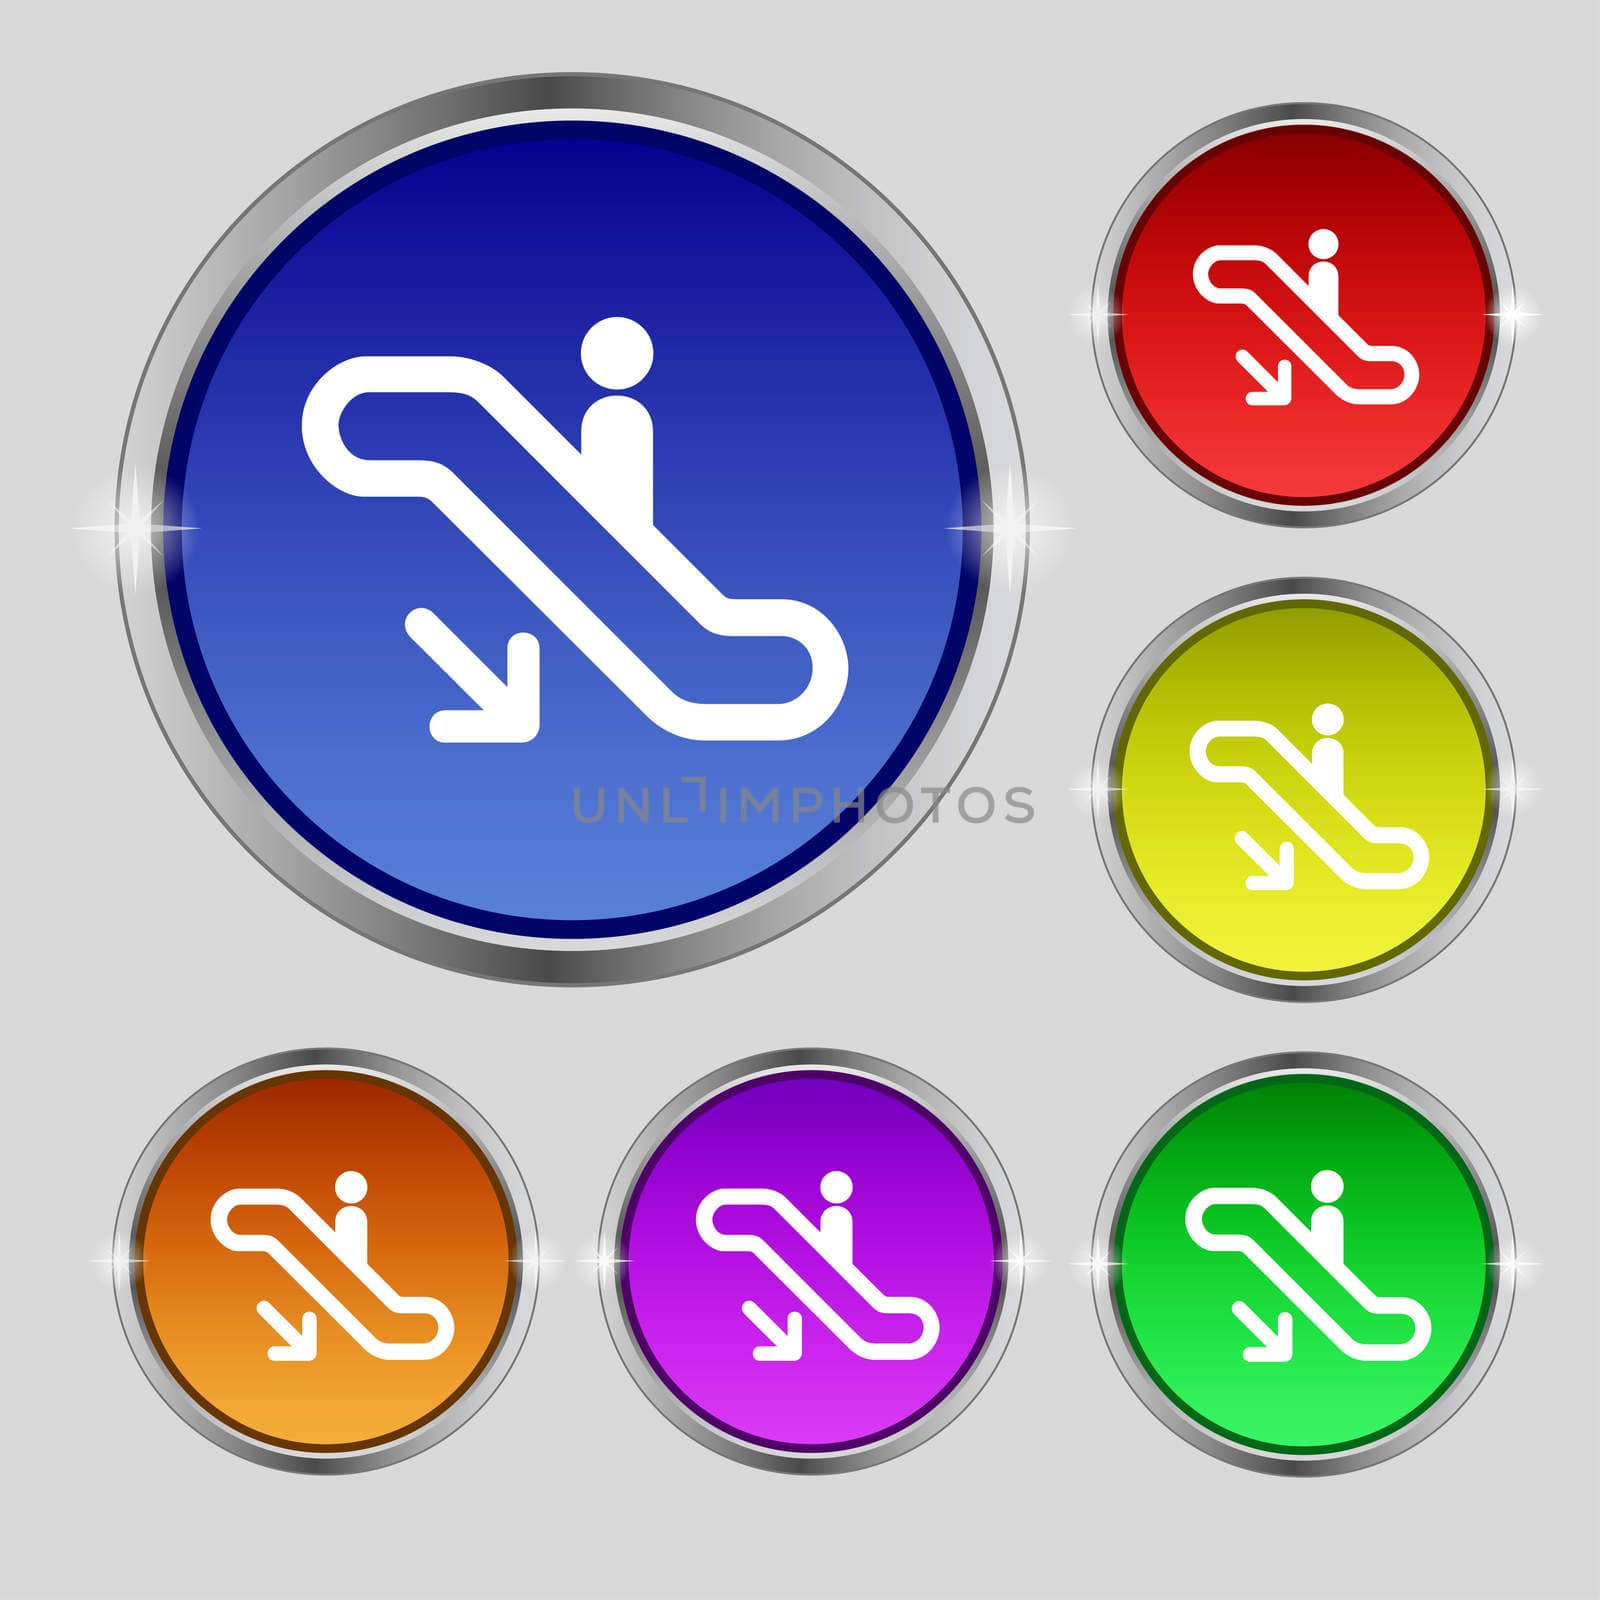 elevator, Escalator, Staircase icon sign. Round symbol on bright colourful buttons.  by serhii_lohvyniuk